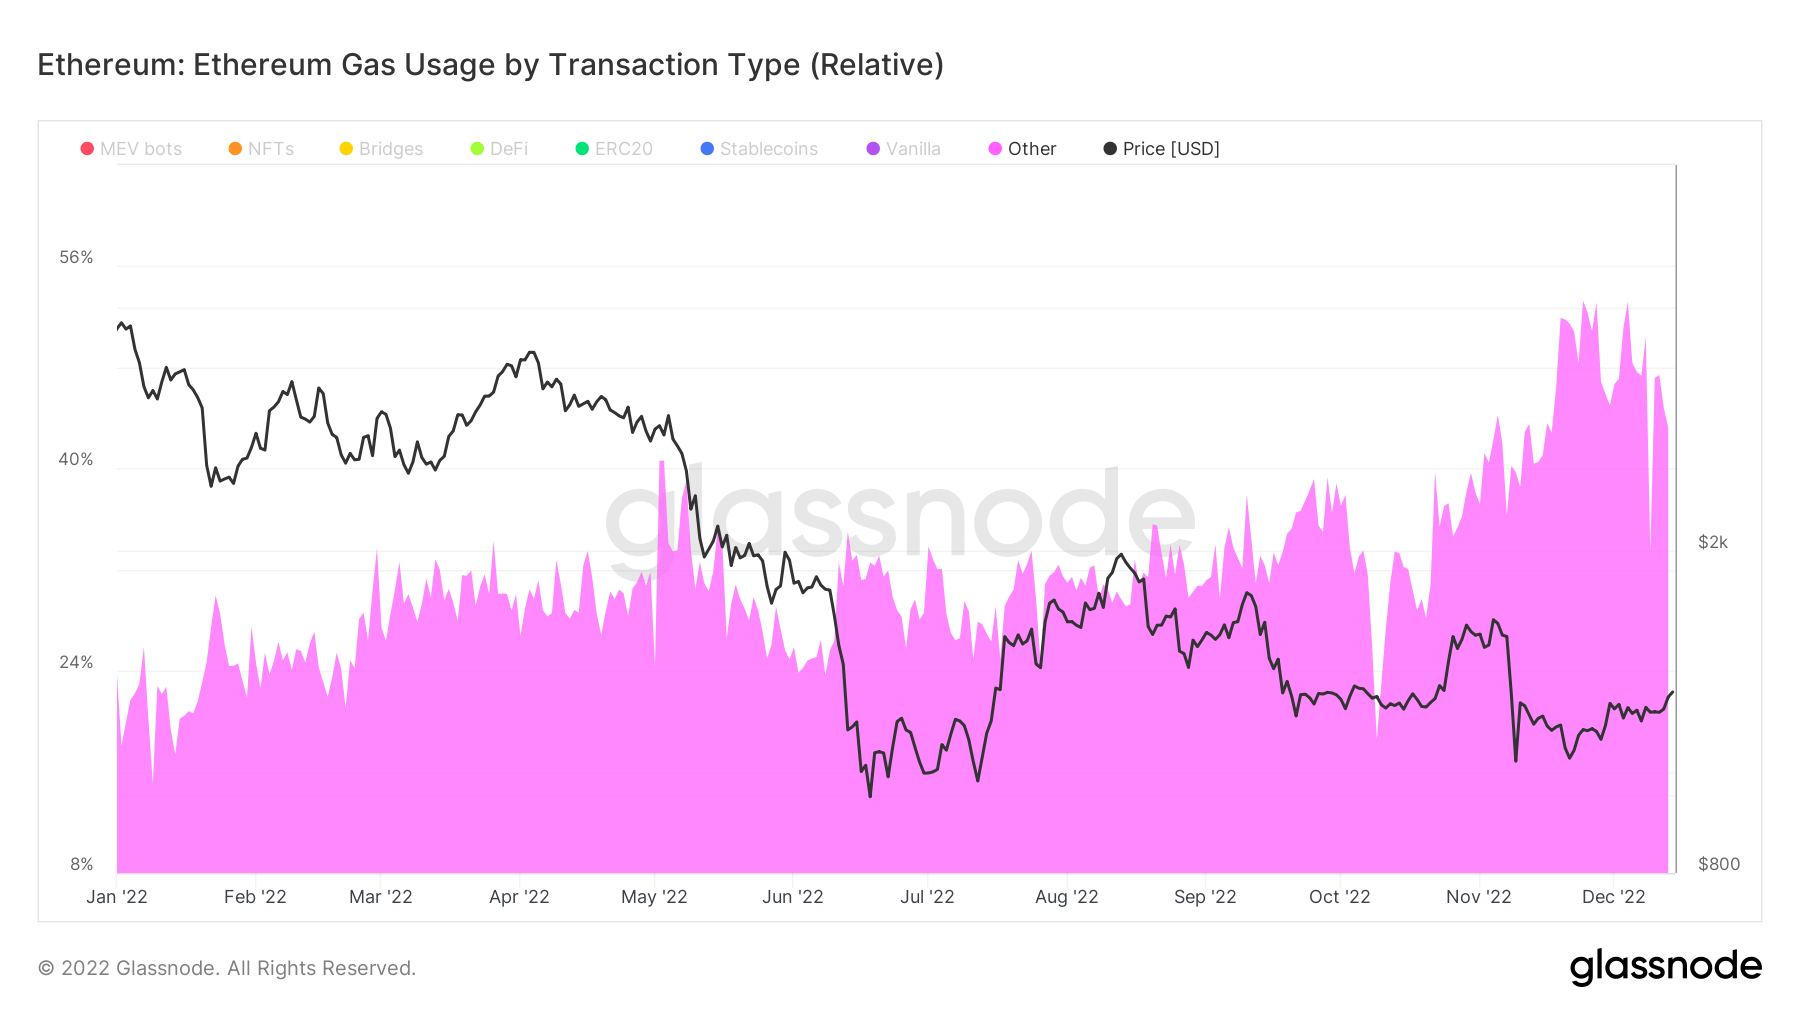 ETH supports other transactions